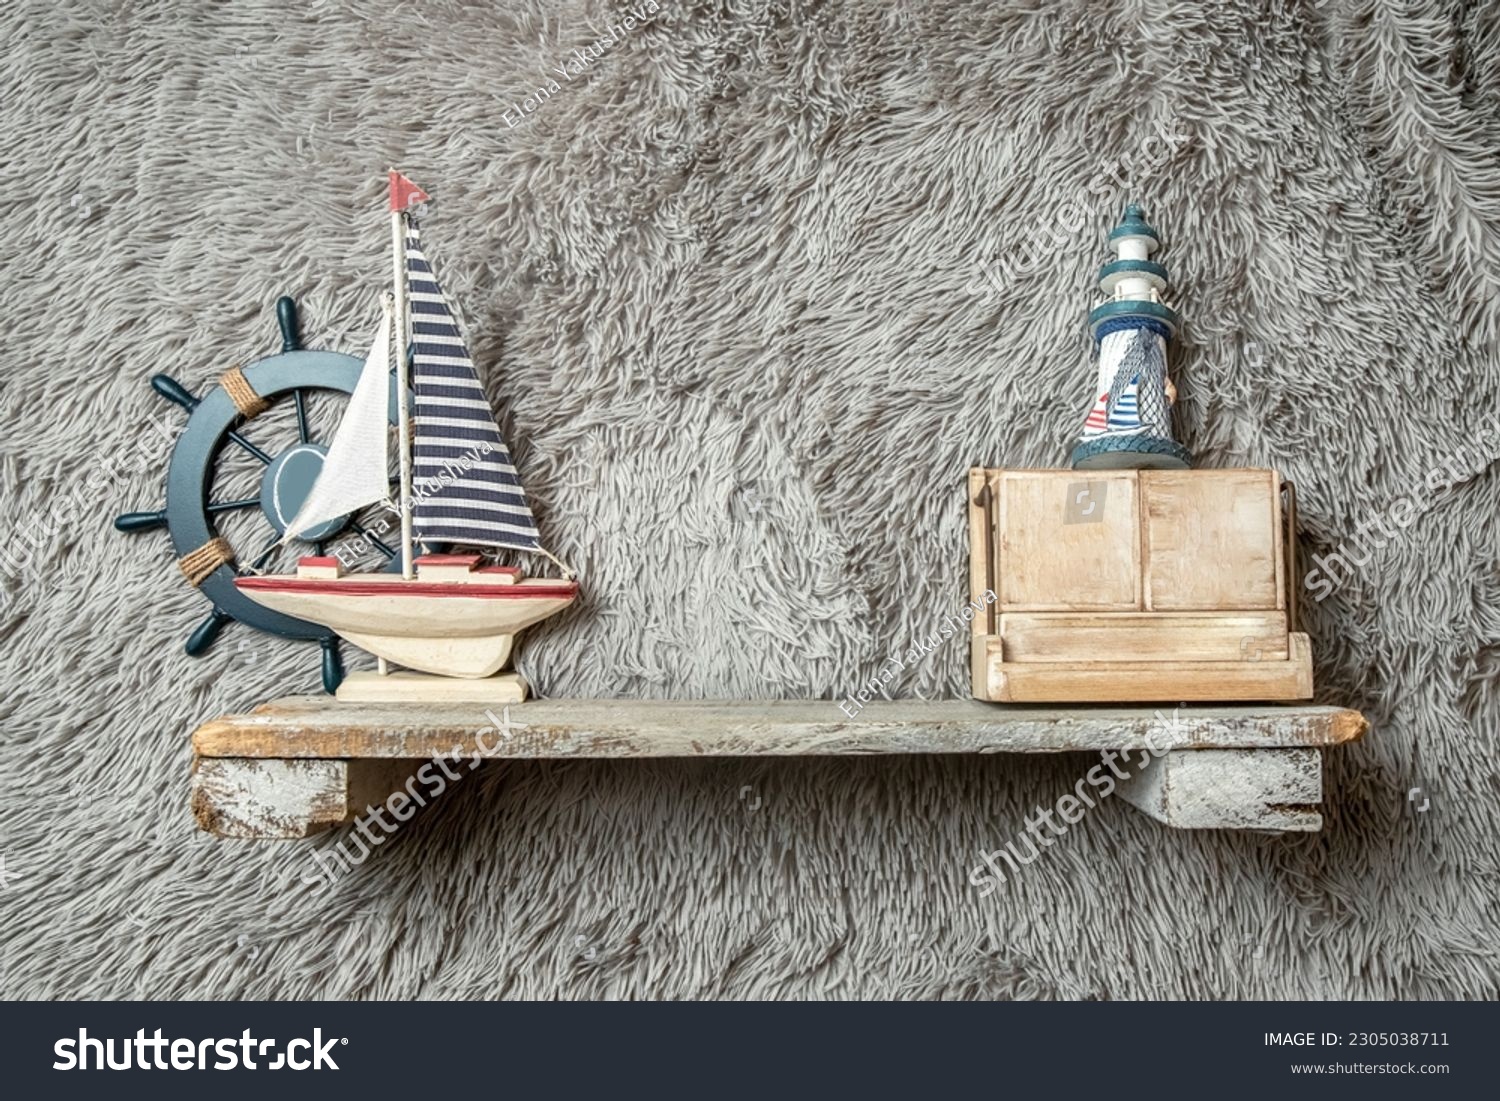 toys on a wooden shelf as digital backdrop or background for newborn baby photography, newborn photo setup and decorations. High quality photo #2305038711